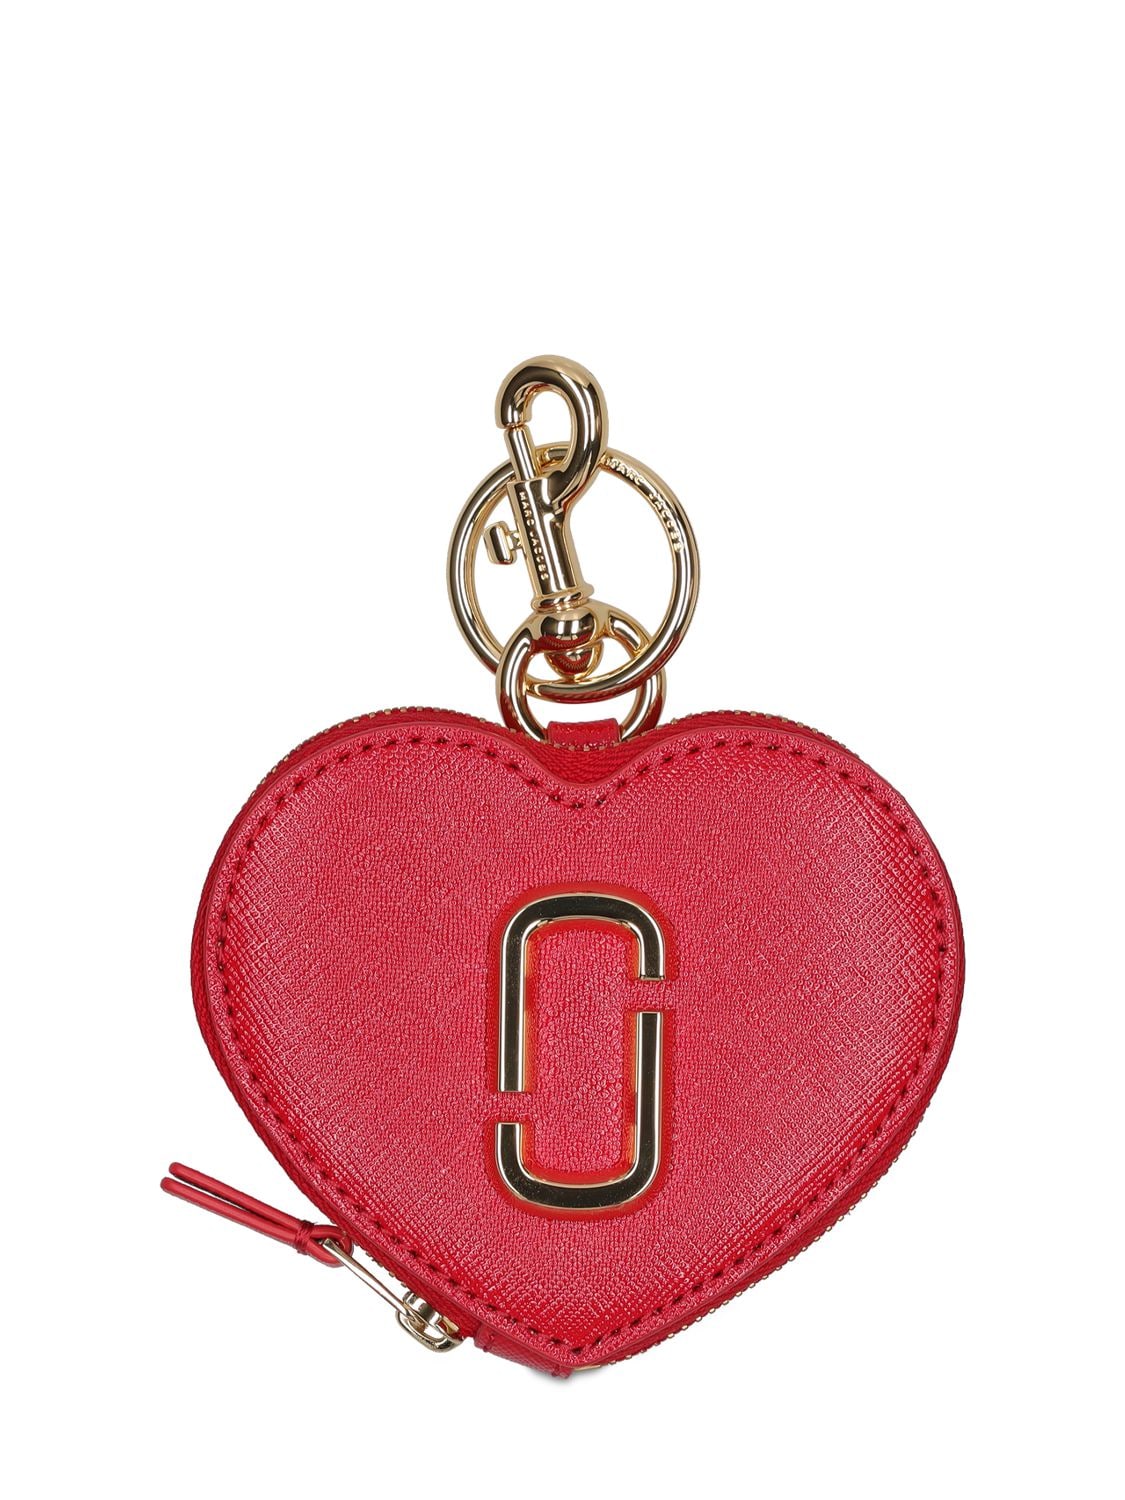 Image of The Heart Leather Pouch